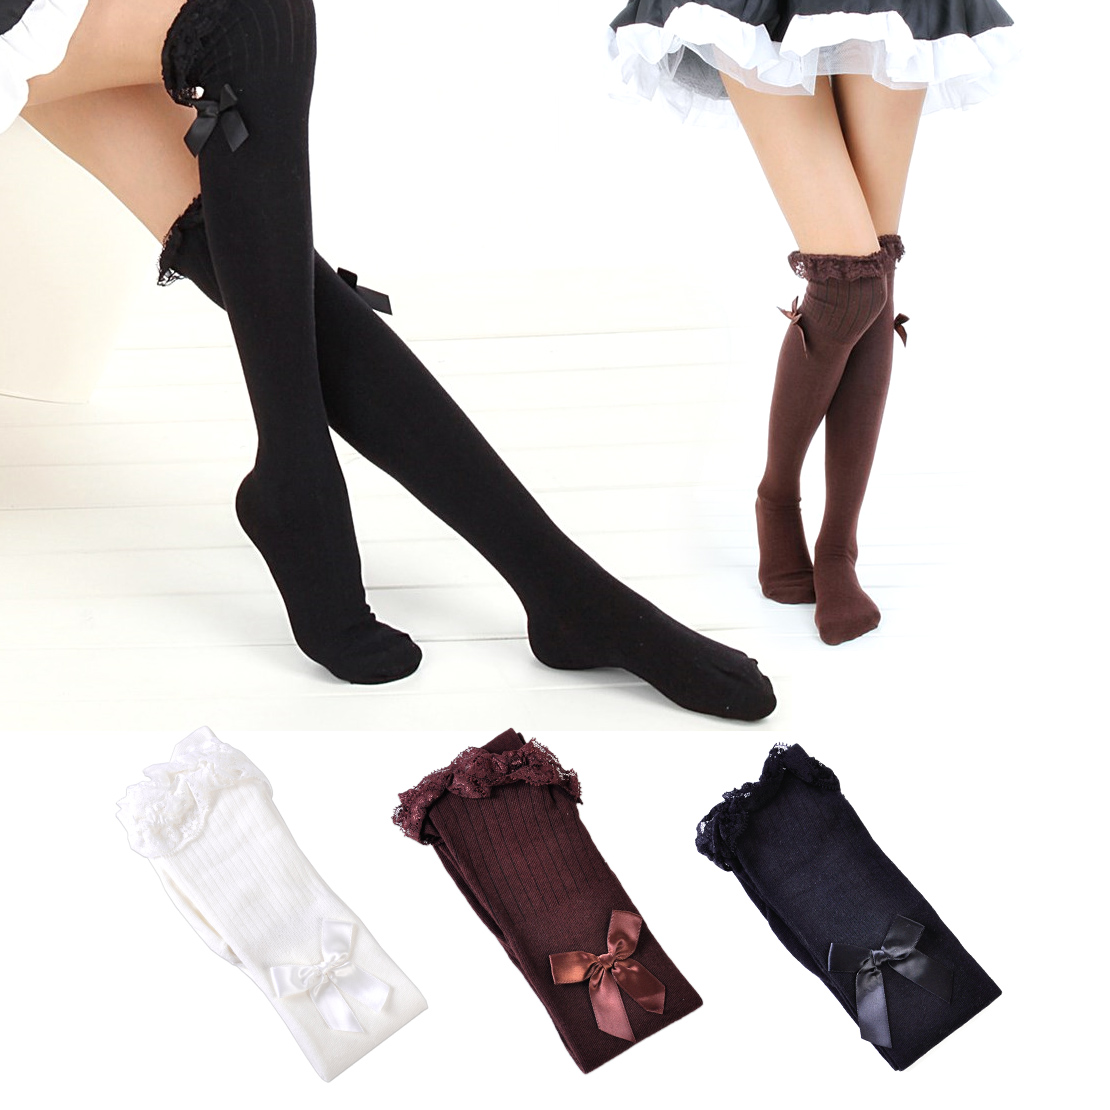 Women/'s Girls Thigh High Stockings Over the Knee Socks with Satin Bows